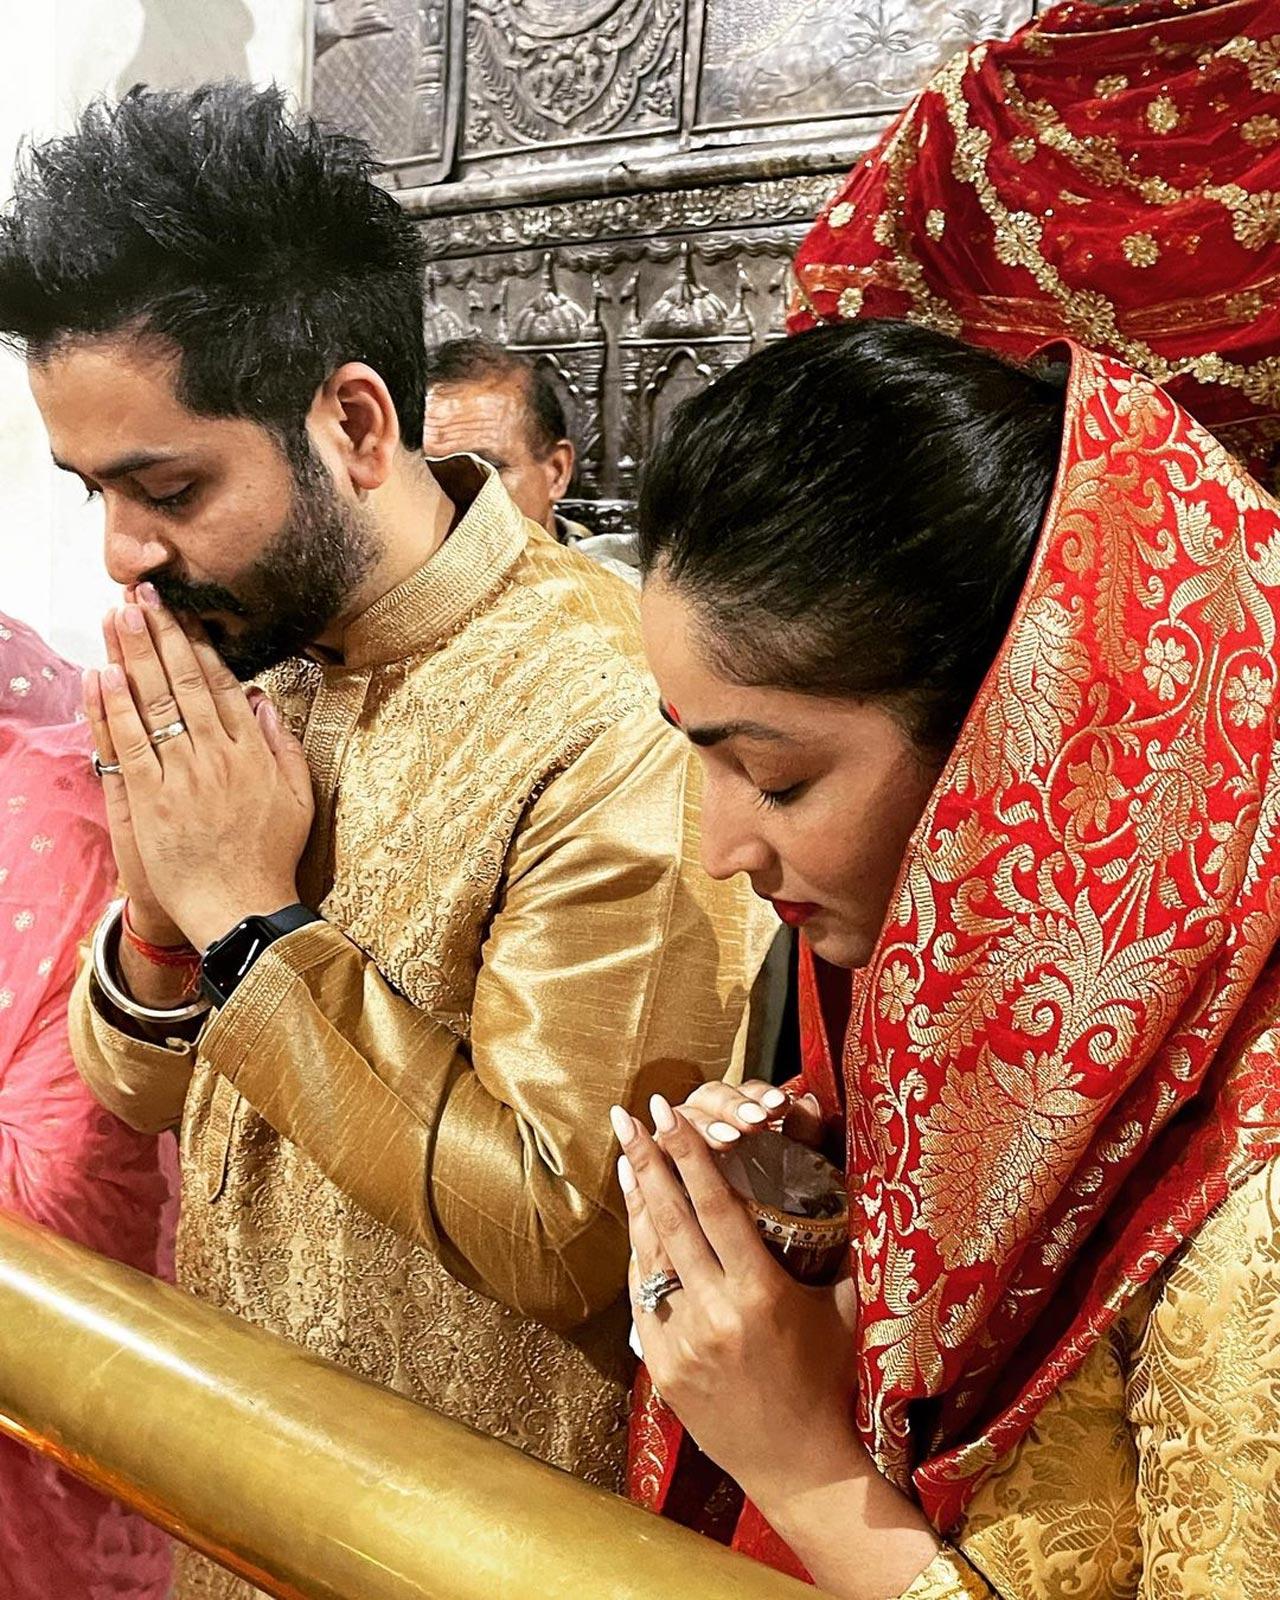 For the couple's Tuesday outing to the temple, Yami wore a pink salwar kameez while Aditya donned a white kurta-pyjama with a black Nehru Jacket and a white pocket square